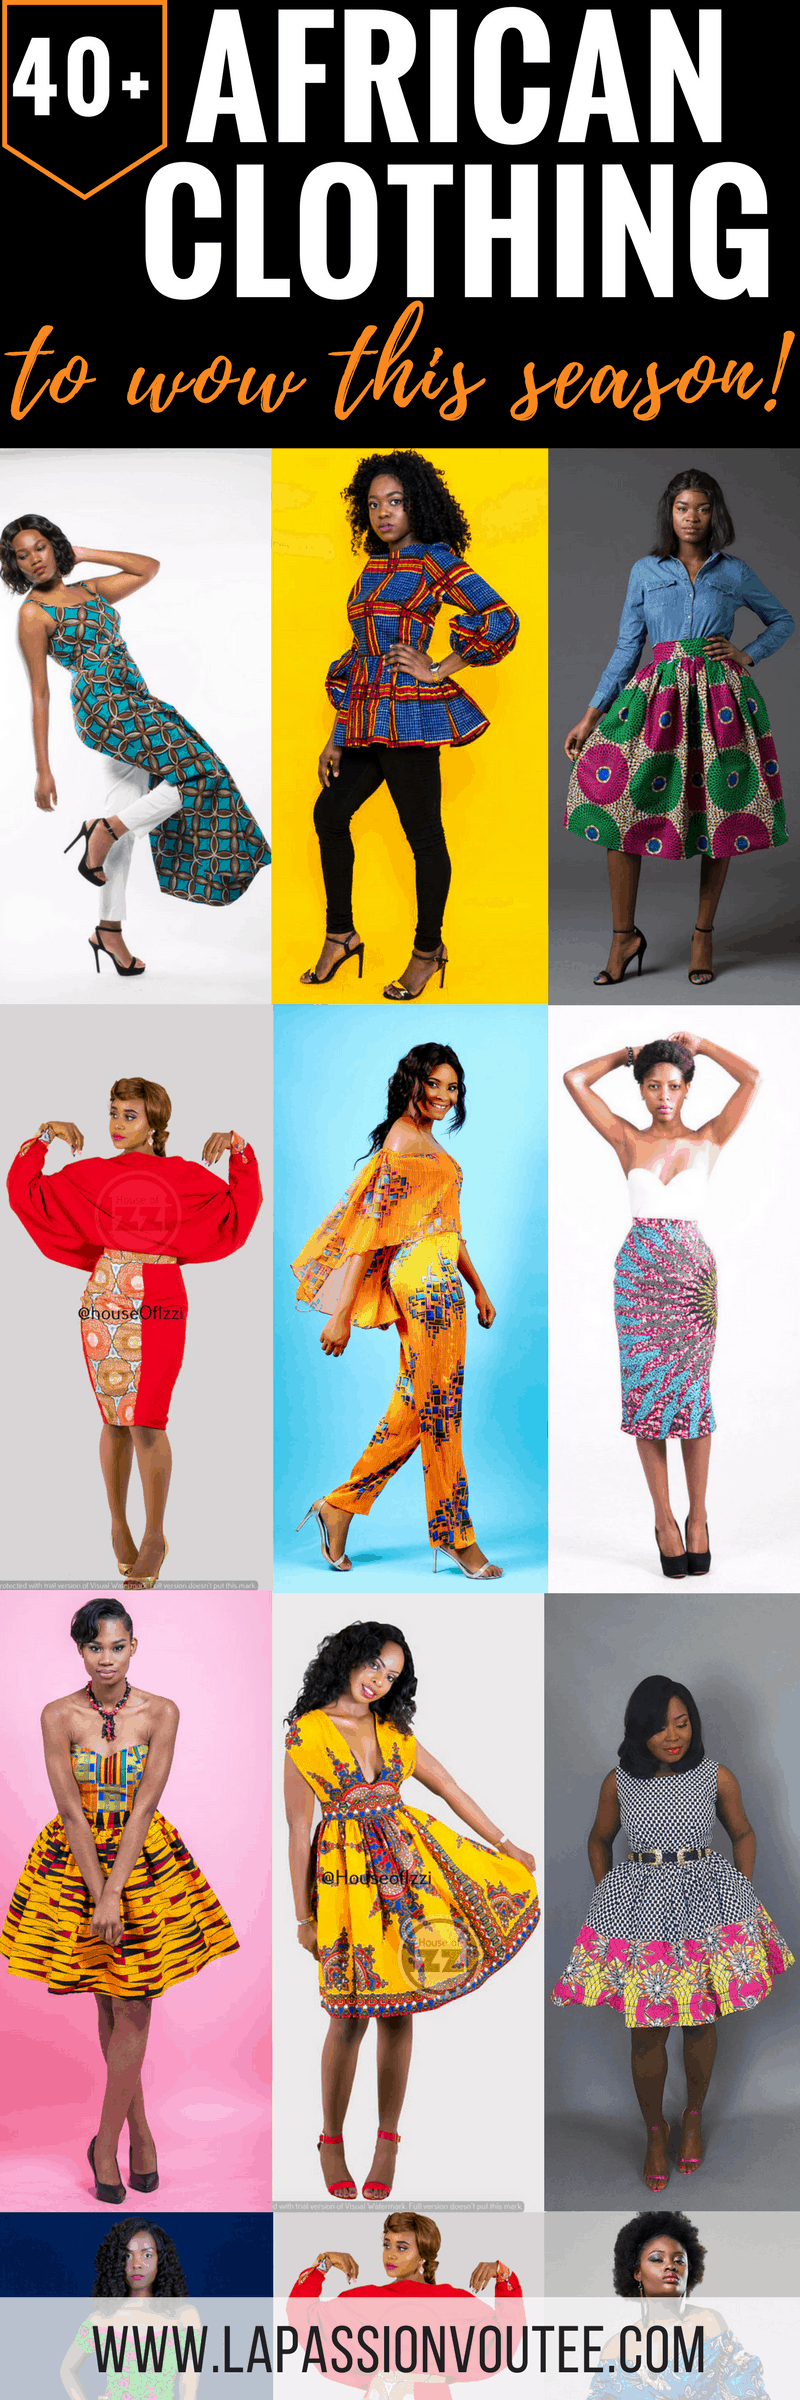 40+ Stunning African Clothing You Need + Where to Get Them. On a search for the hottest African styles? Look no further! Read this post to discover the best collection of African clothes to get right now. ankara styles, african clothes, dashiki, african dress, african clothing, african print dresses,  African dress styles, African fashion, Nigerian fashion, Senegal fashion, Nigerian wedding, African attire, ankara, dutch wax